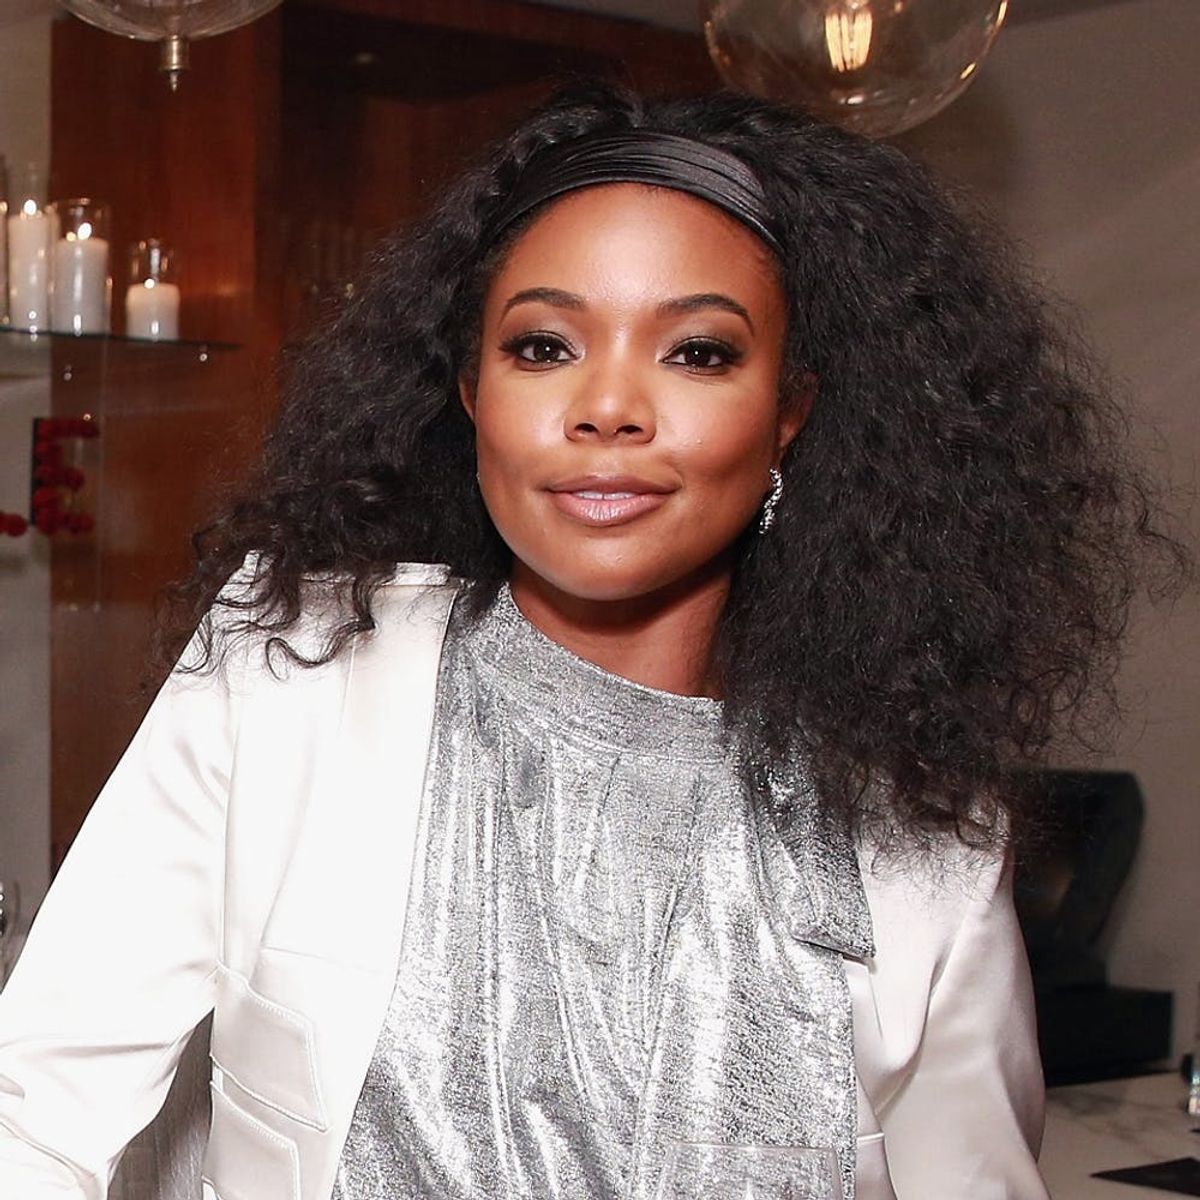 Gabrielle Union on #MeToo: “I Don’t Think It’s a Coincidence Whose Pain Has Been Taken Seriously”